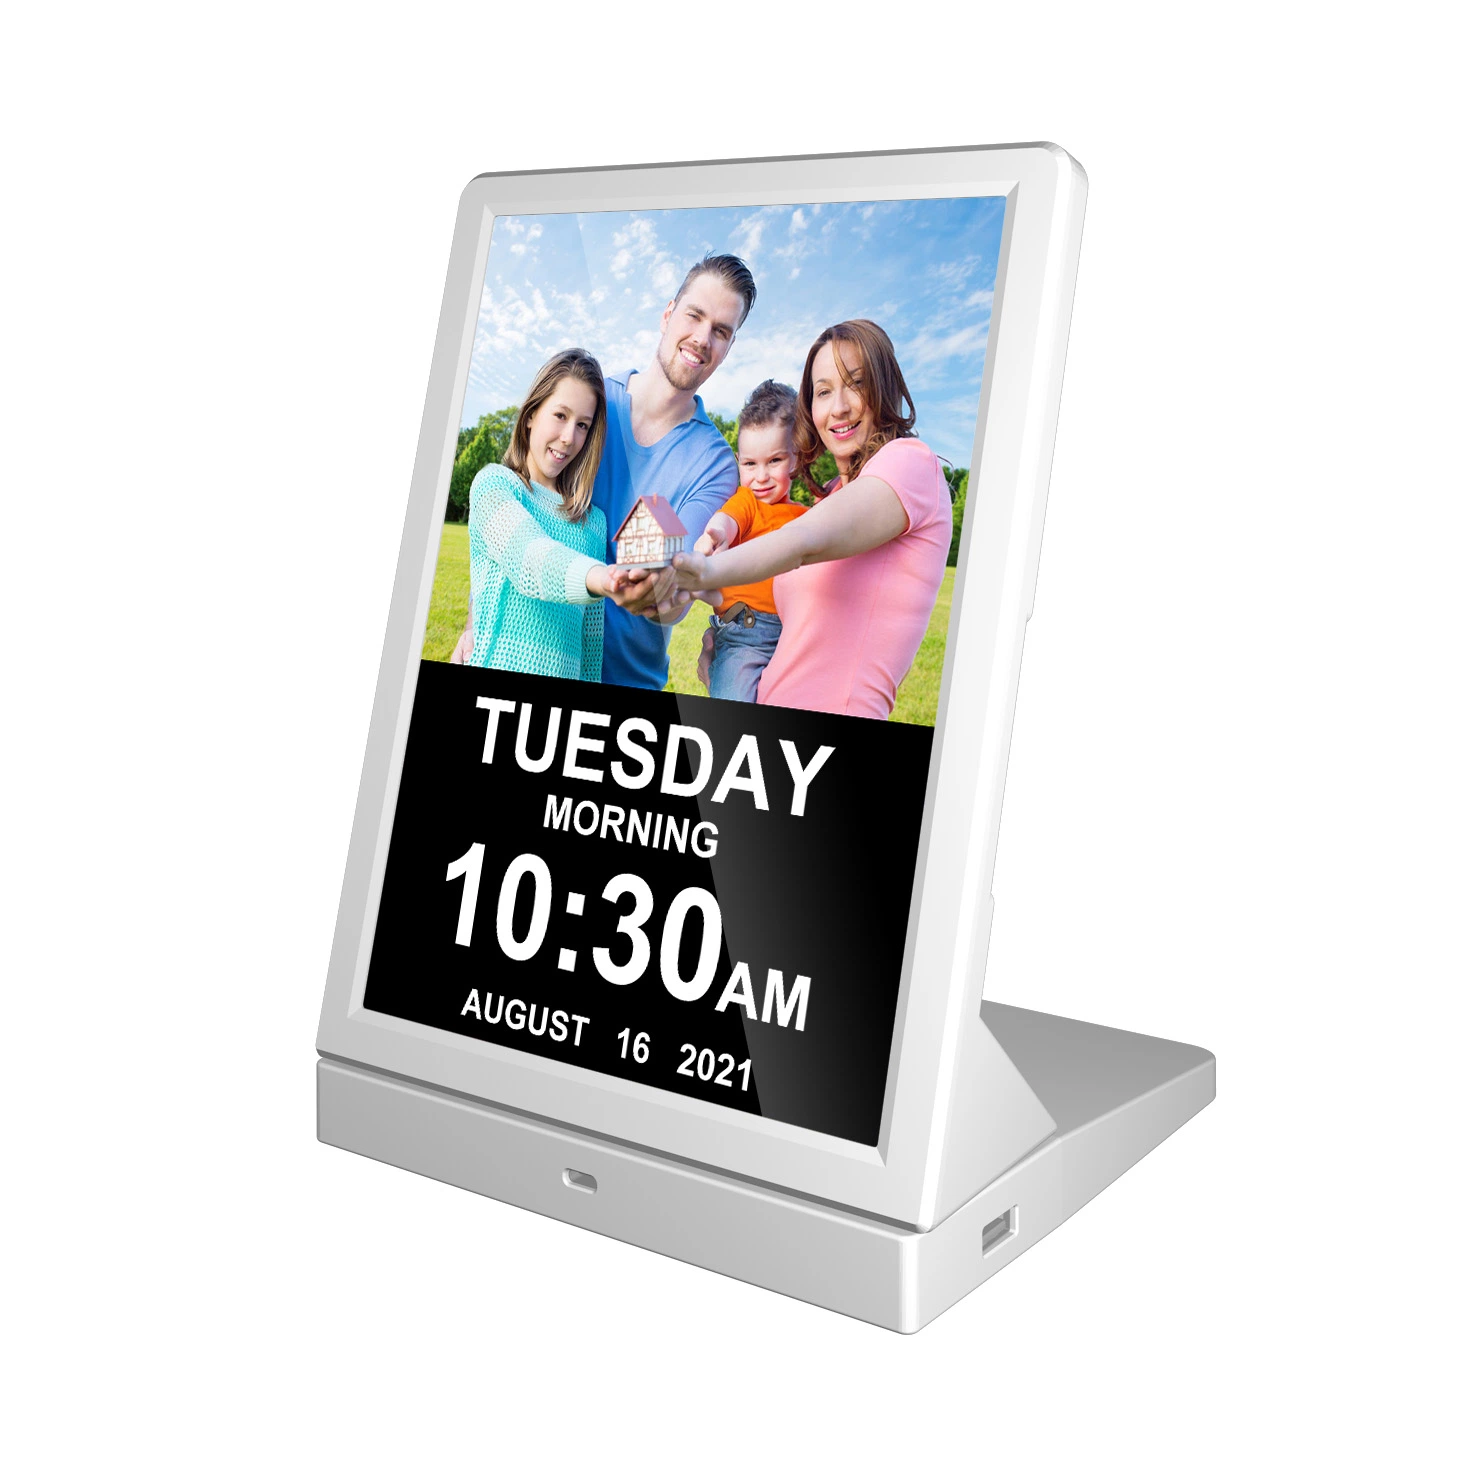 New Operated High Capacity Battery Desktop WiFi Digital Photo Frame with Wireless Charger